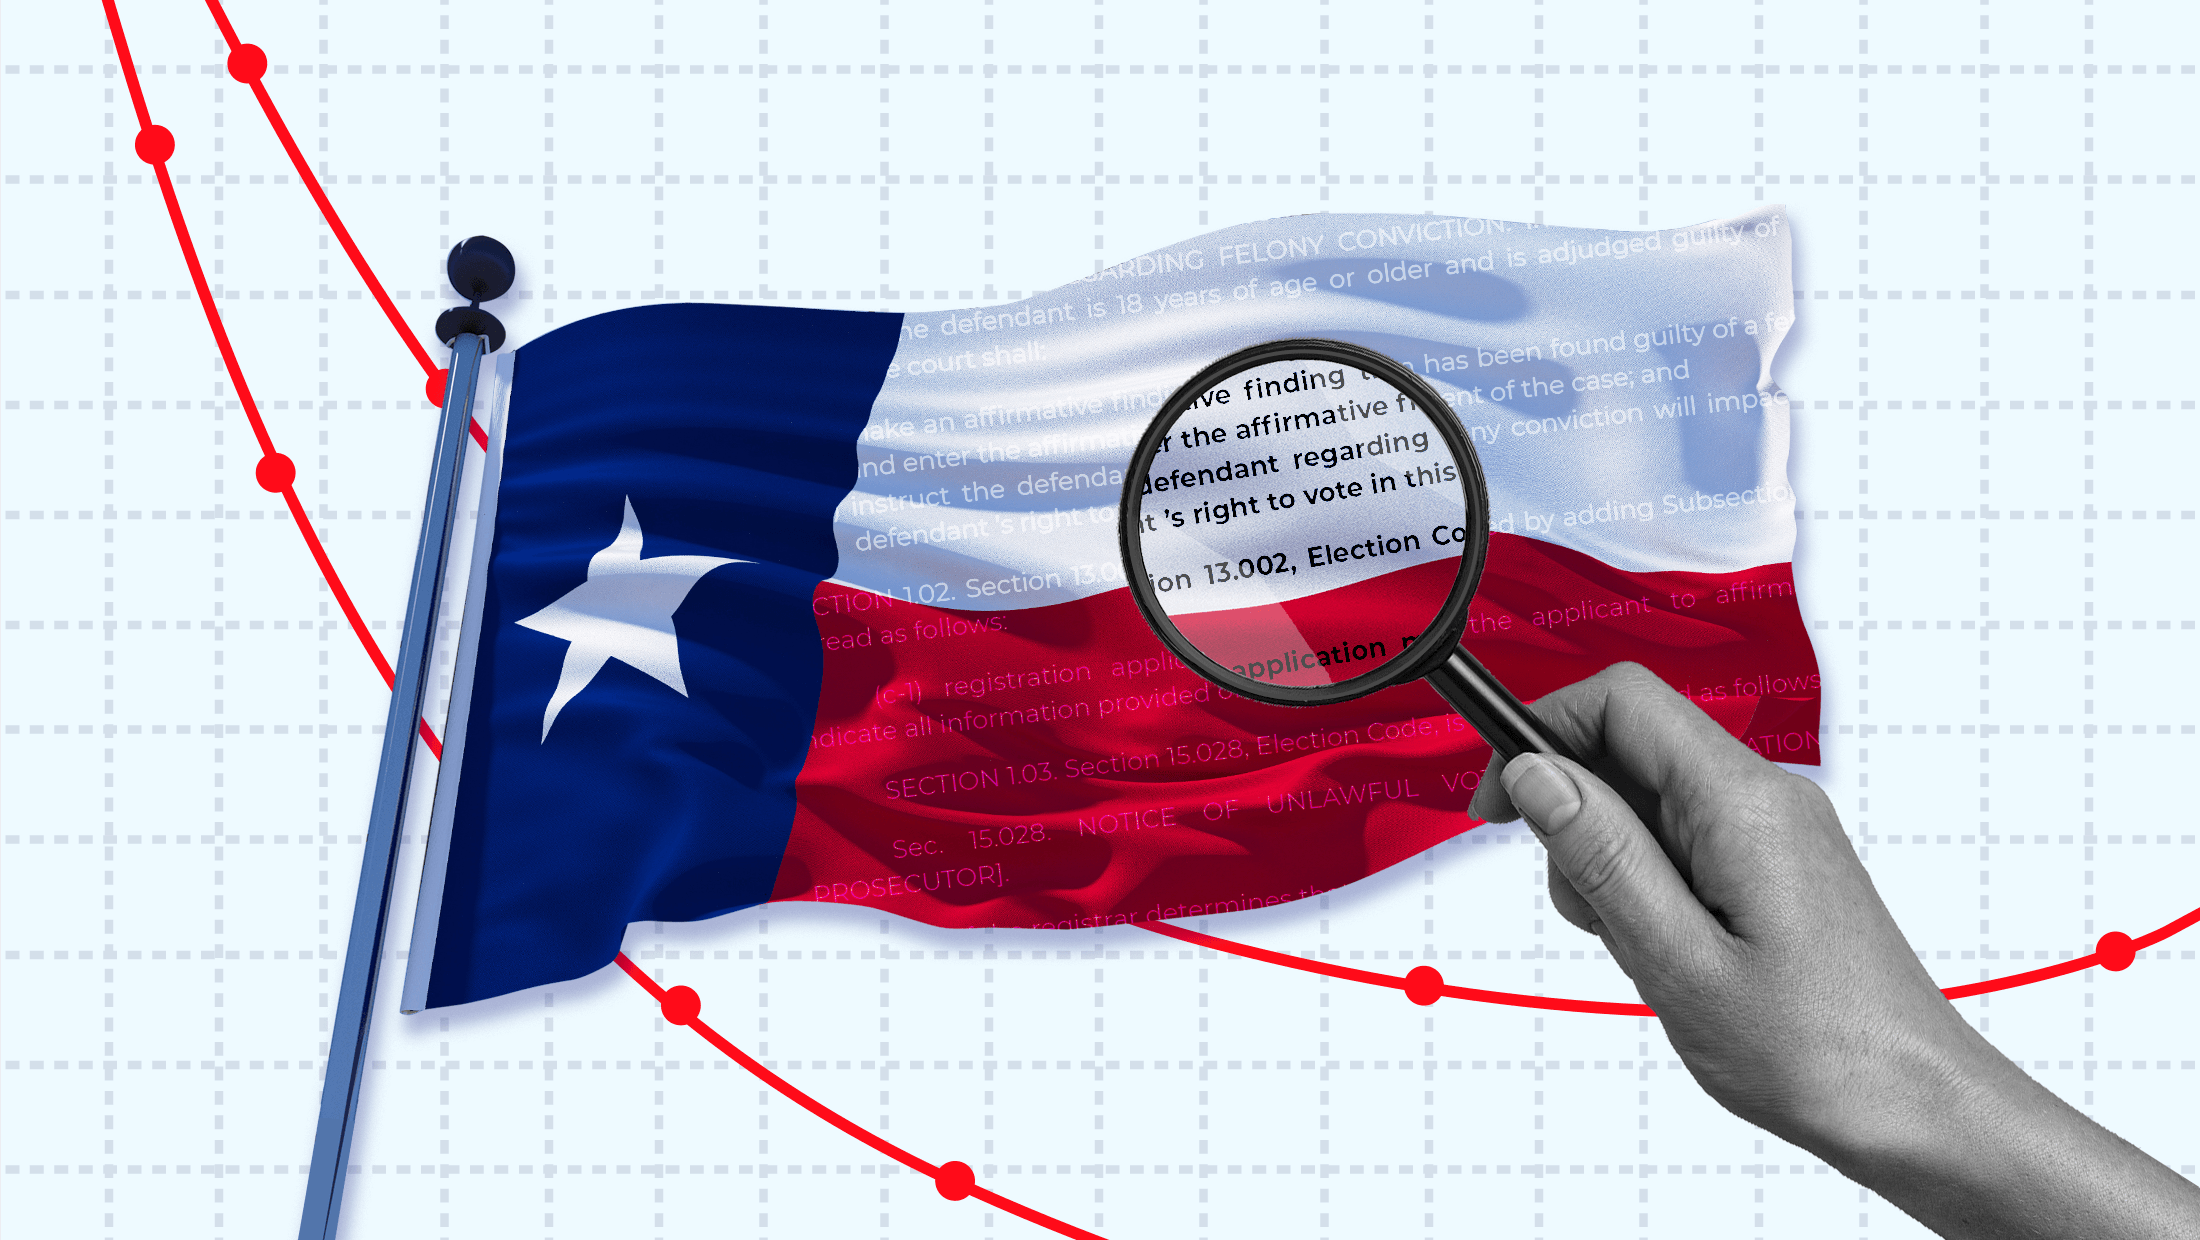 A hand holding a magnifying glass over the Texas flag that has words from the state's voter suppression bill etched into it, mounted on a piece of graph paper with various data points